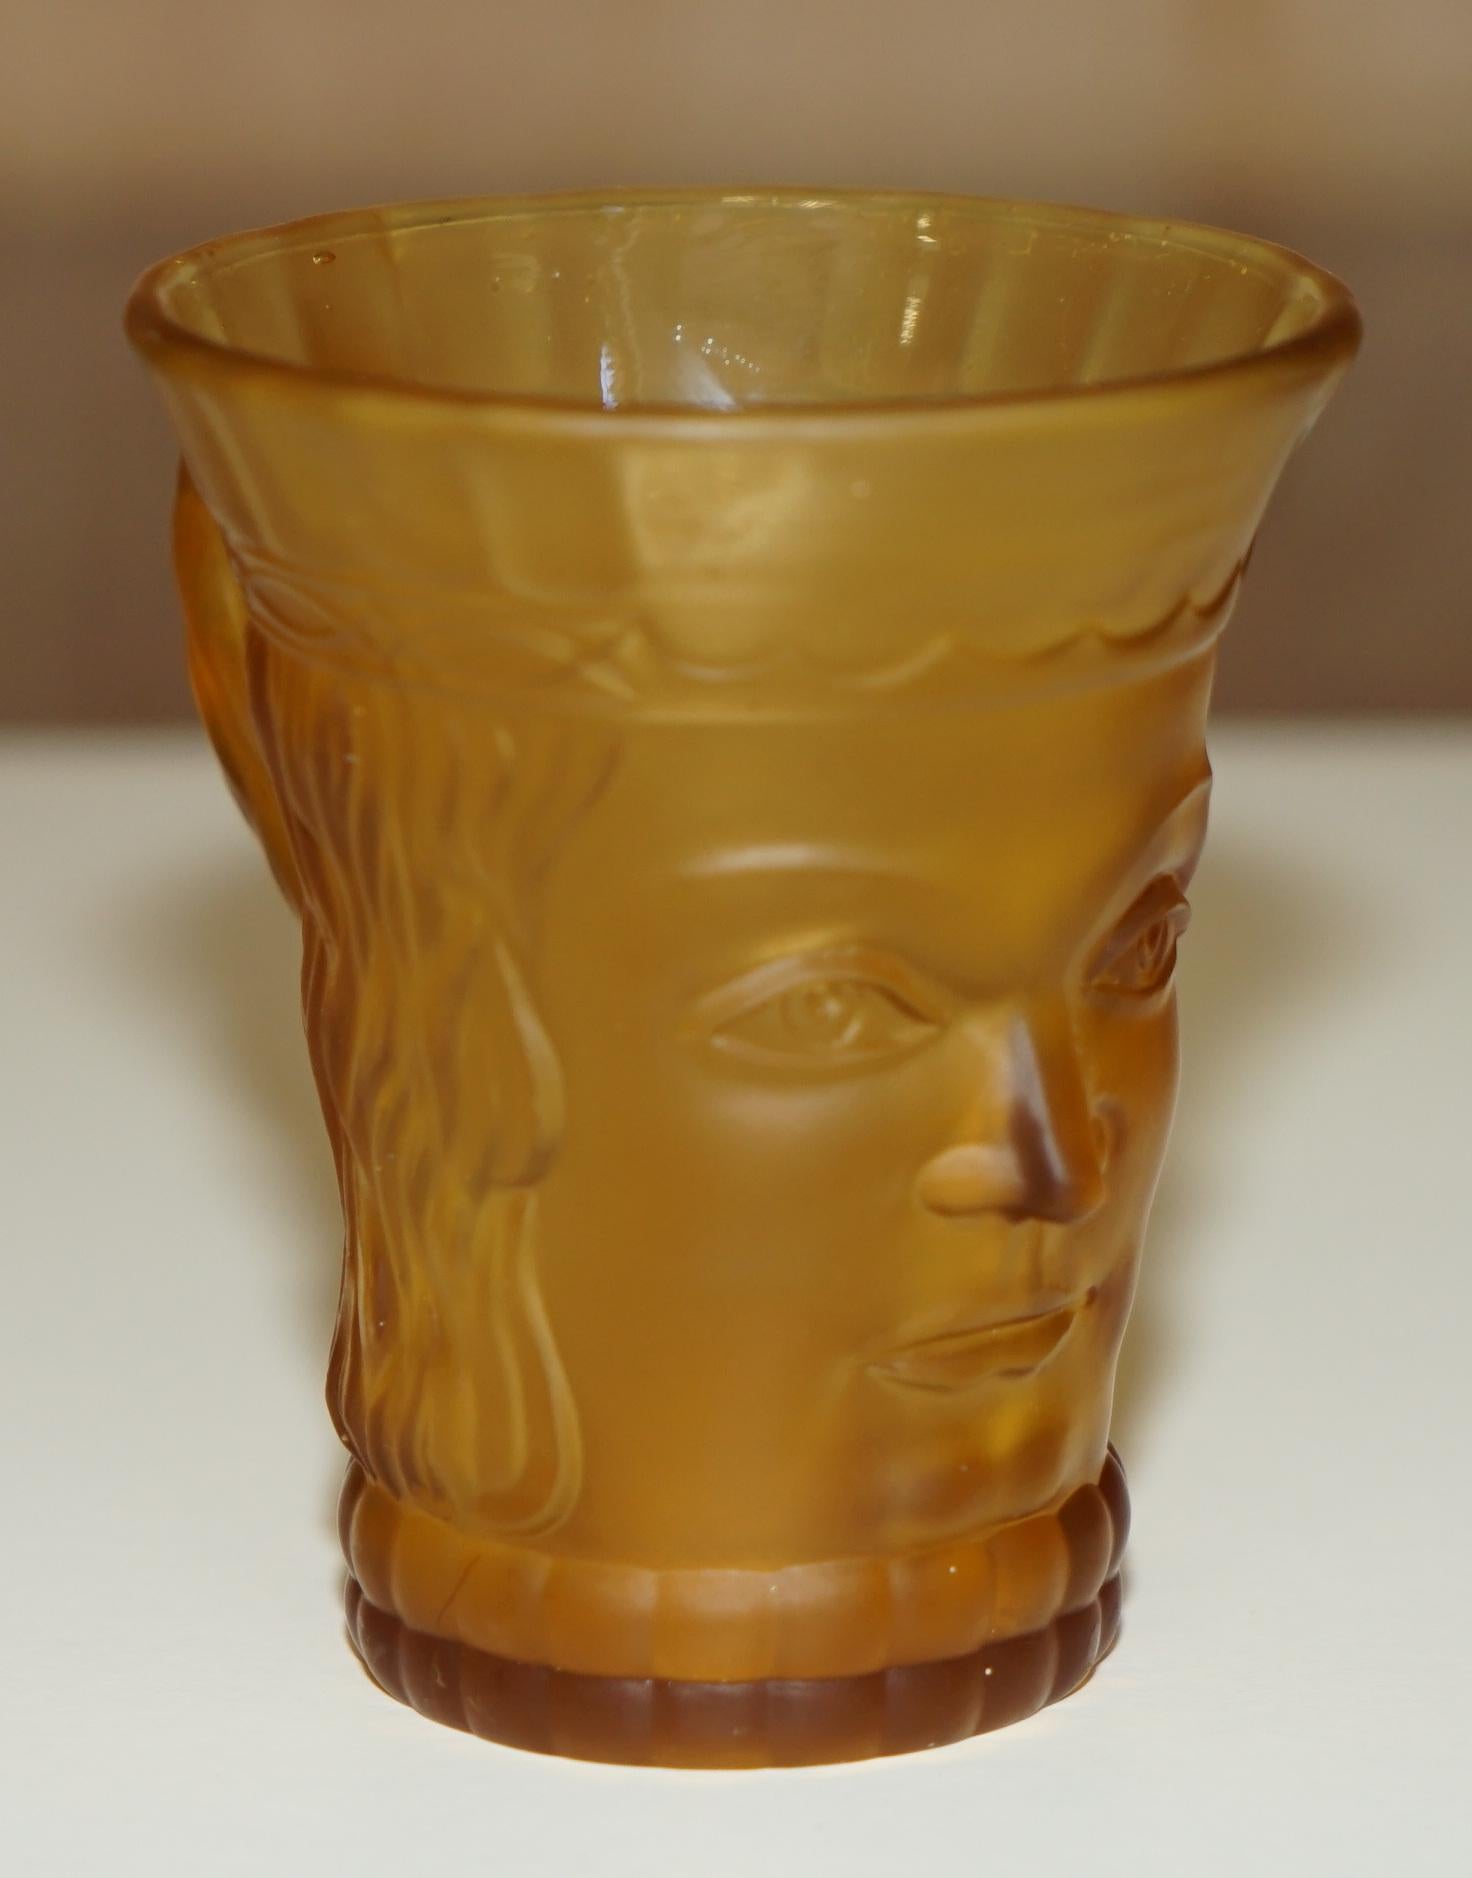 VINTAGE ART DECO CIRCA 1920'S AMBER FACE GLASS CUP SET WITH LARGE PiTCHER JUG For Sale 3